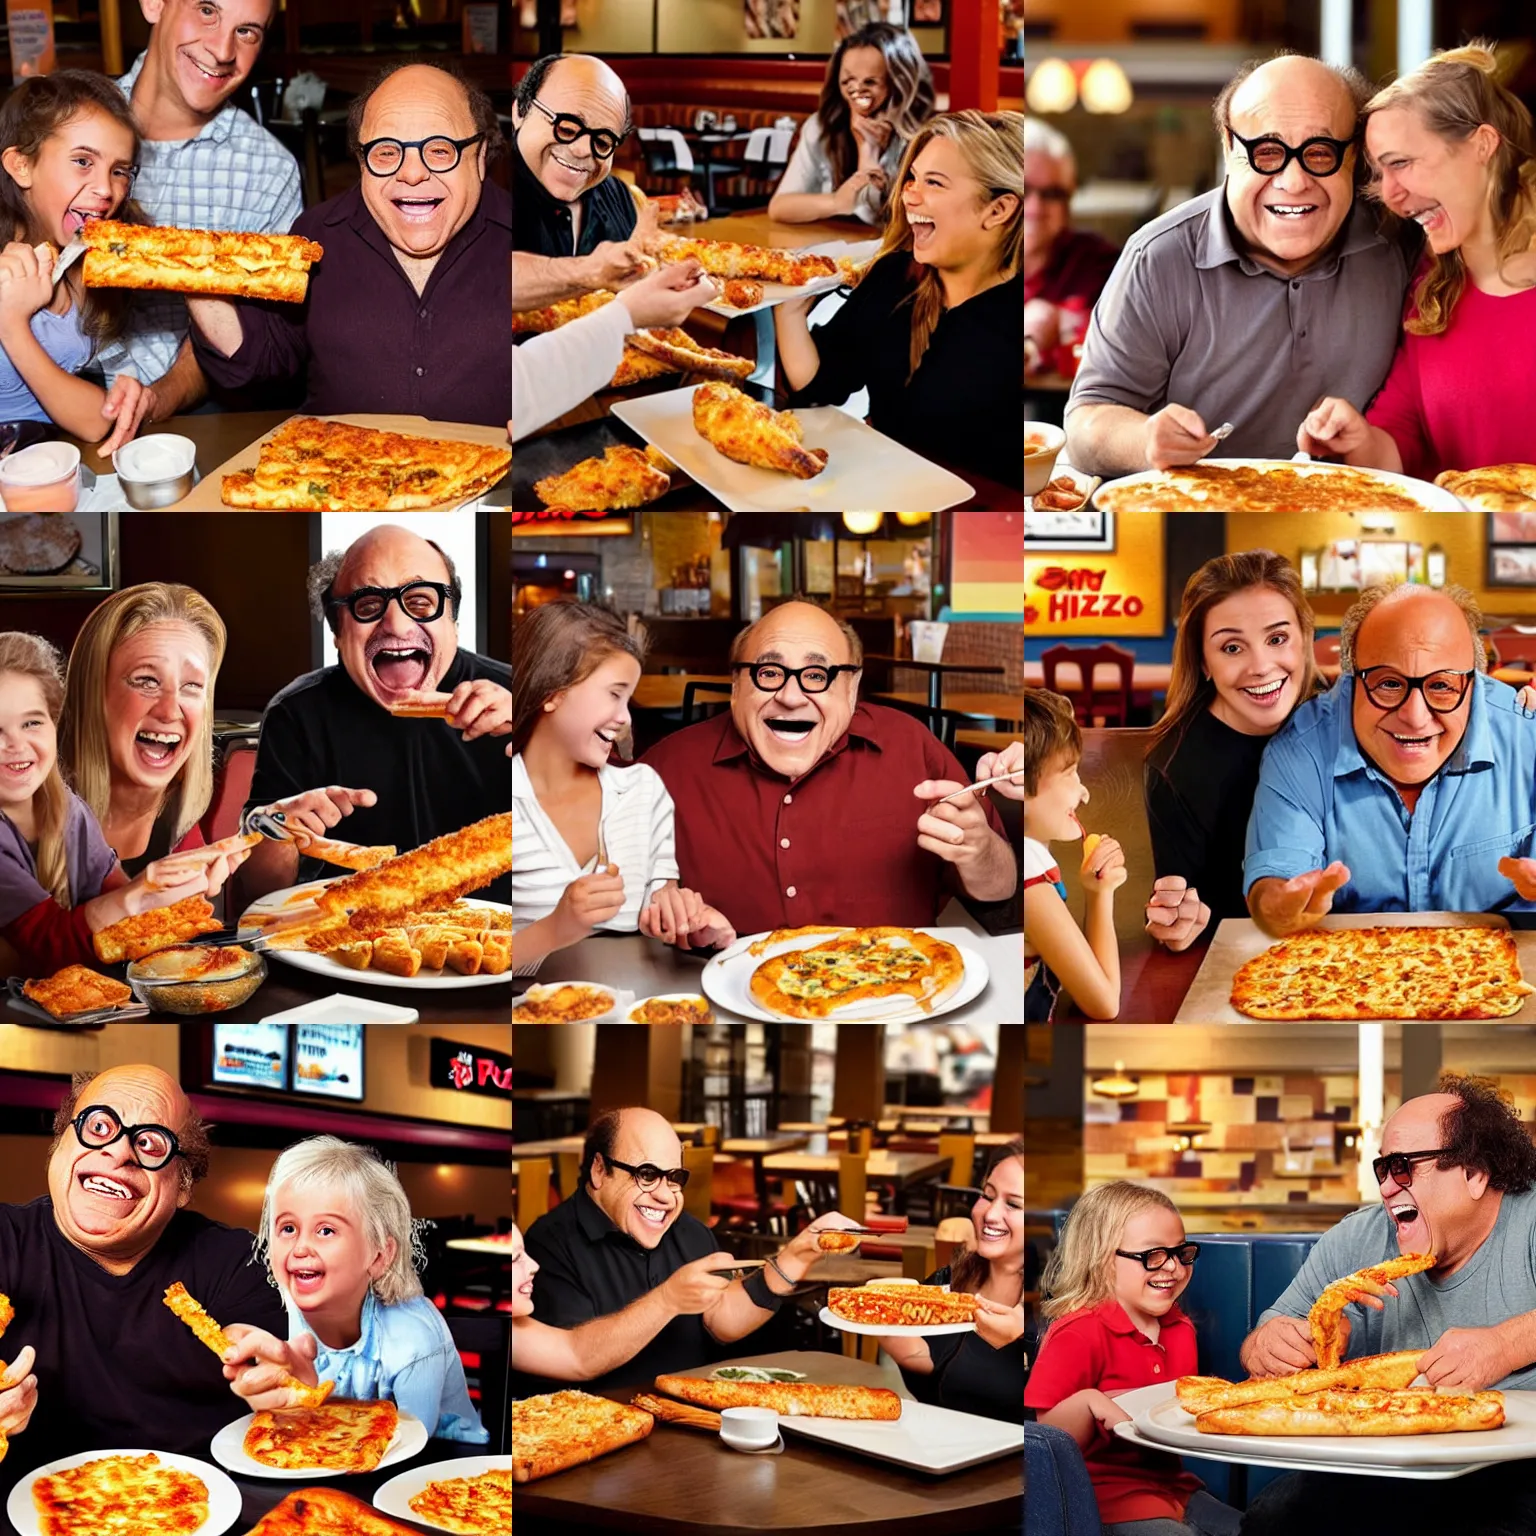 Prompt: Danny DeVito disguised as cheesy bread sticks being served to a smiling, insanely and perhaps disgustingly happy family at a table at Pizza Hut restaurant